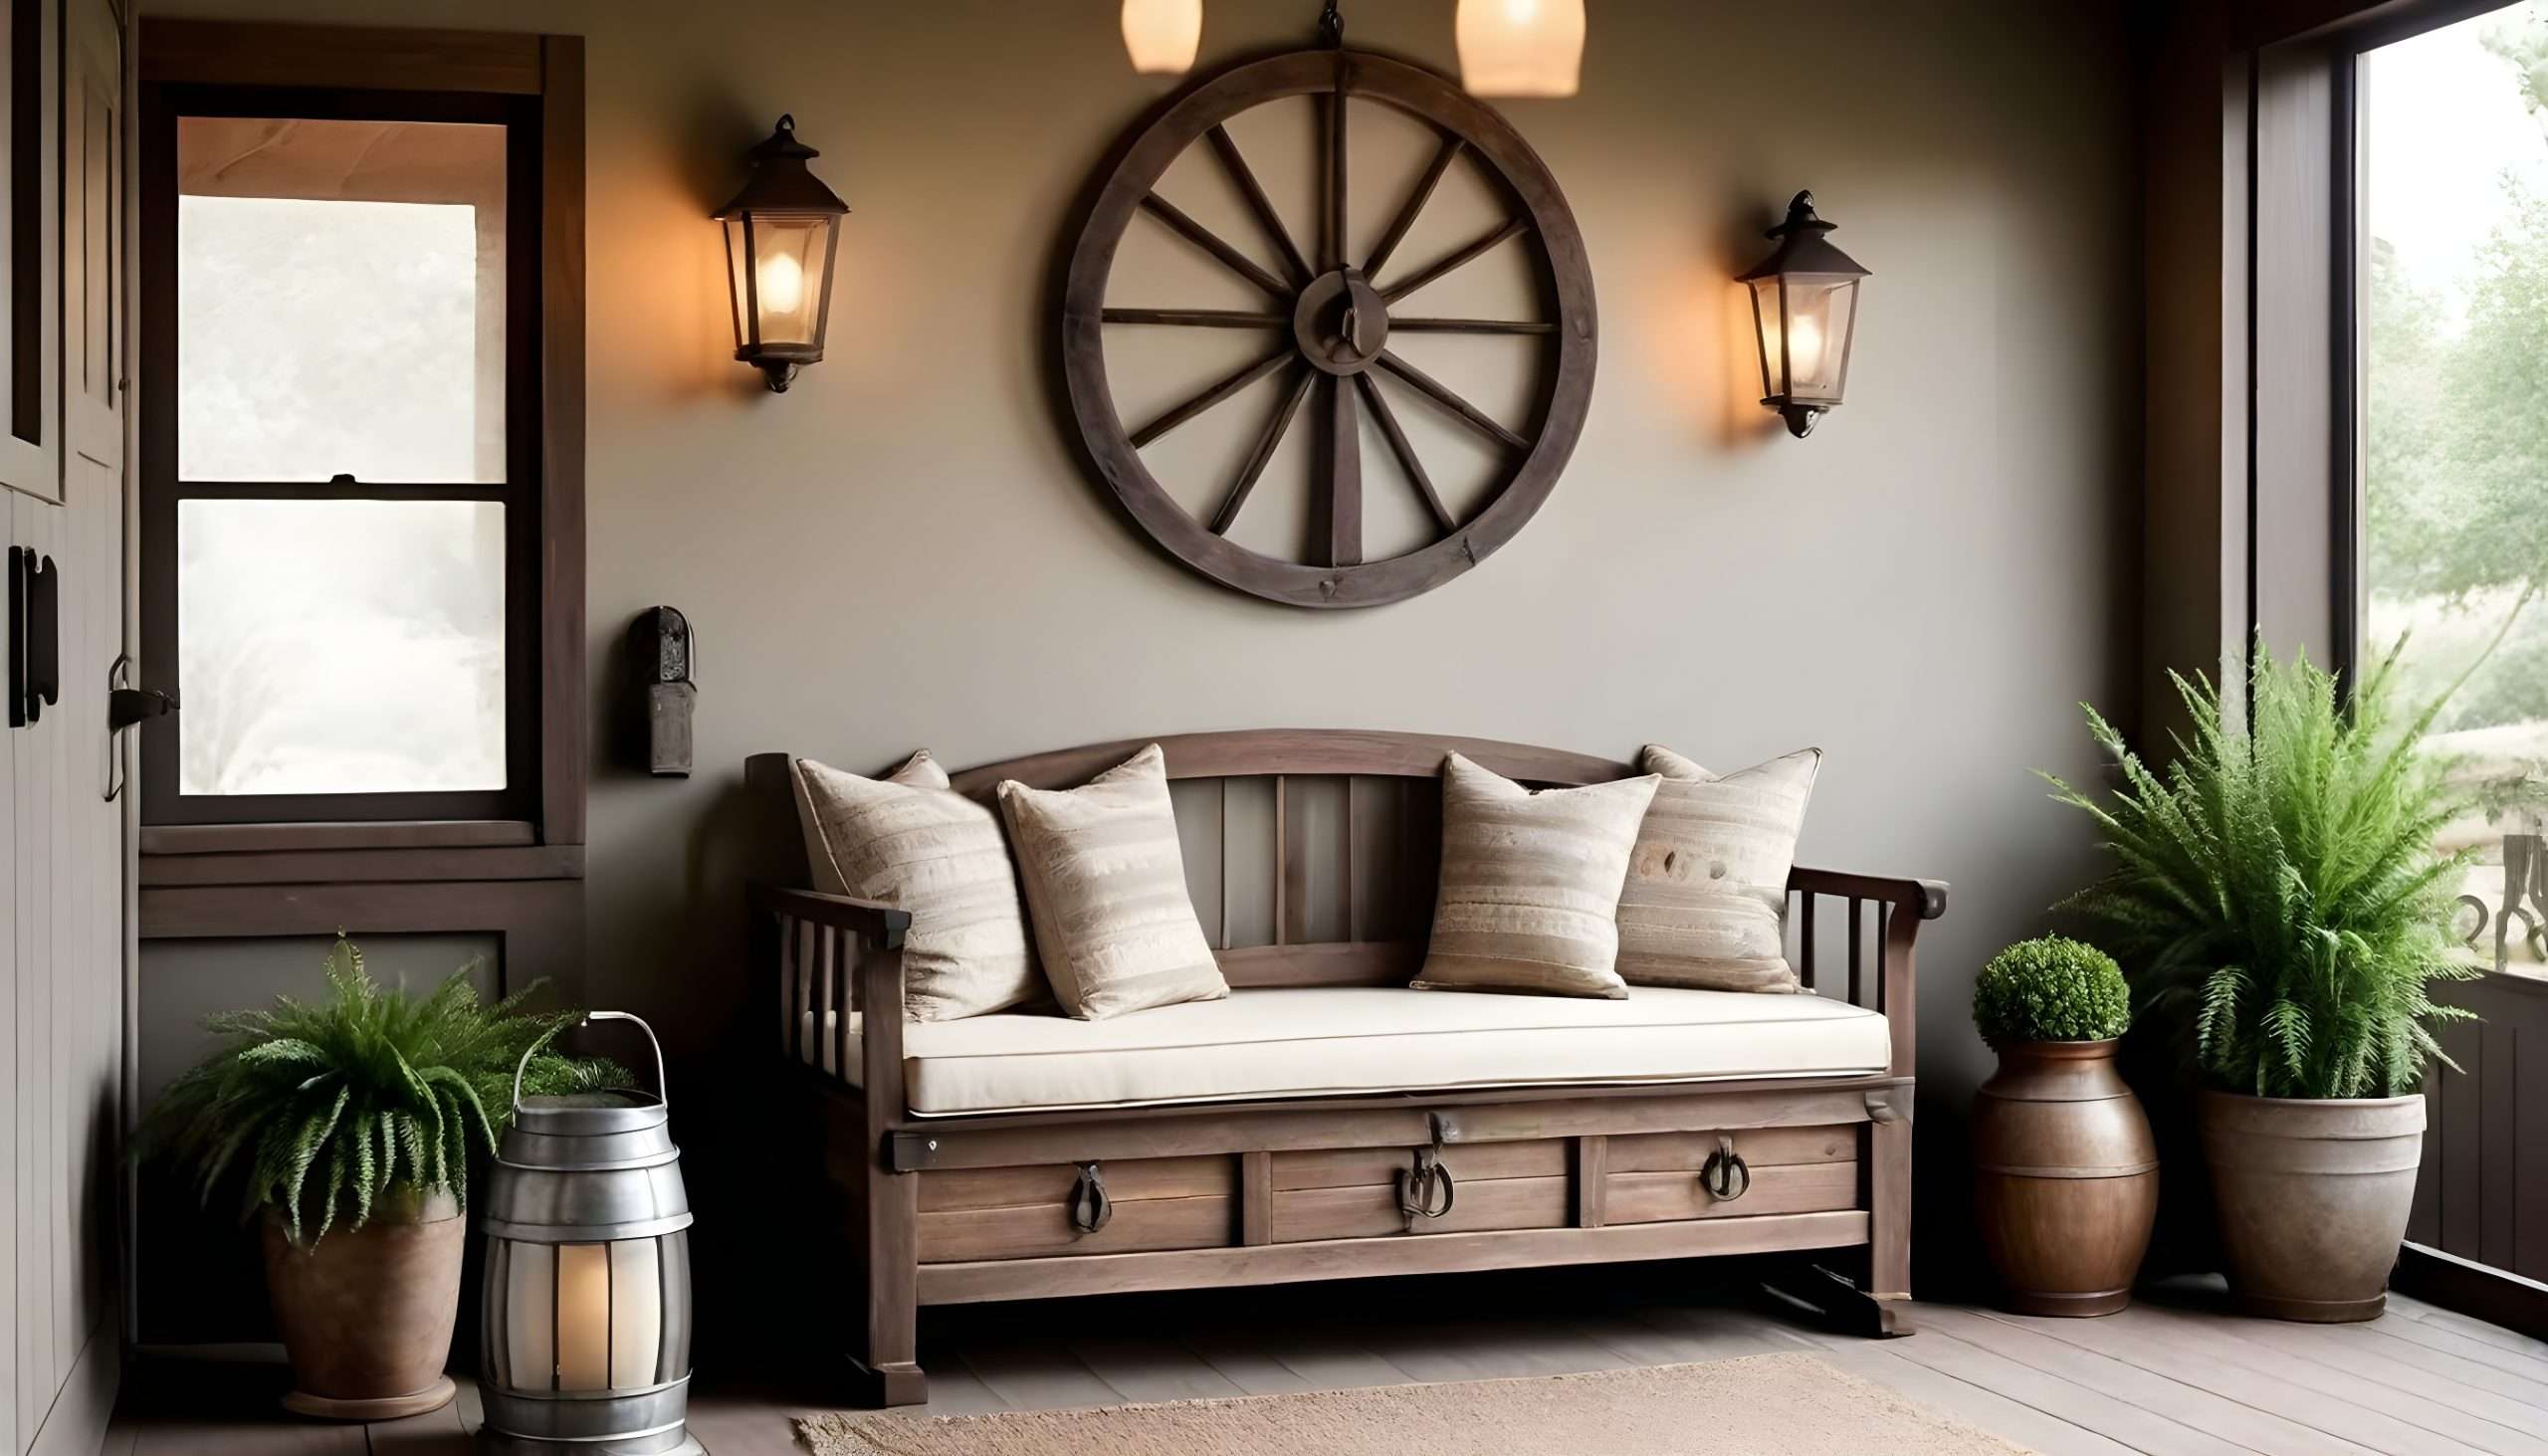 Rustic Elegance with a Hanging Lantern and Wagon Wheel Bench 